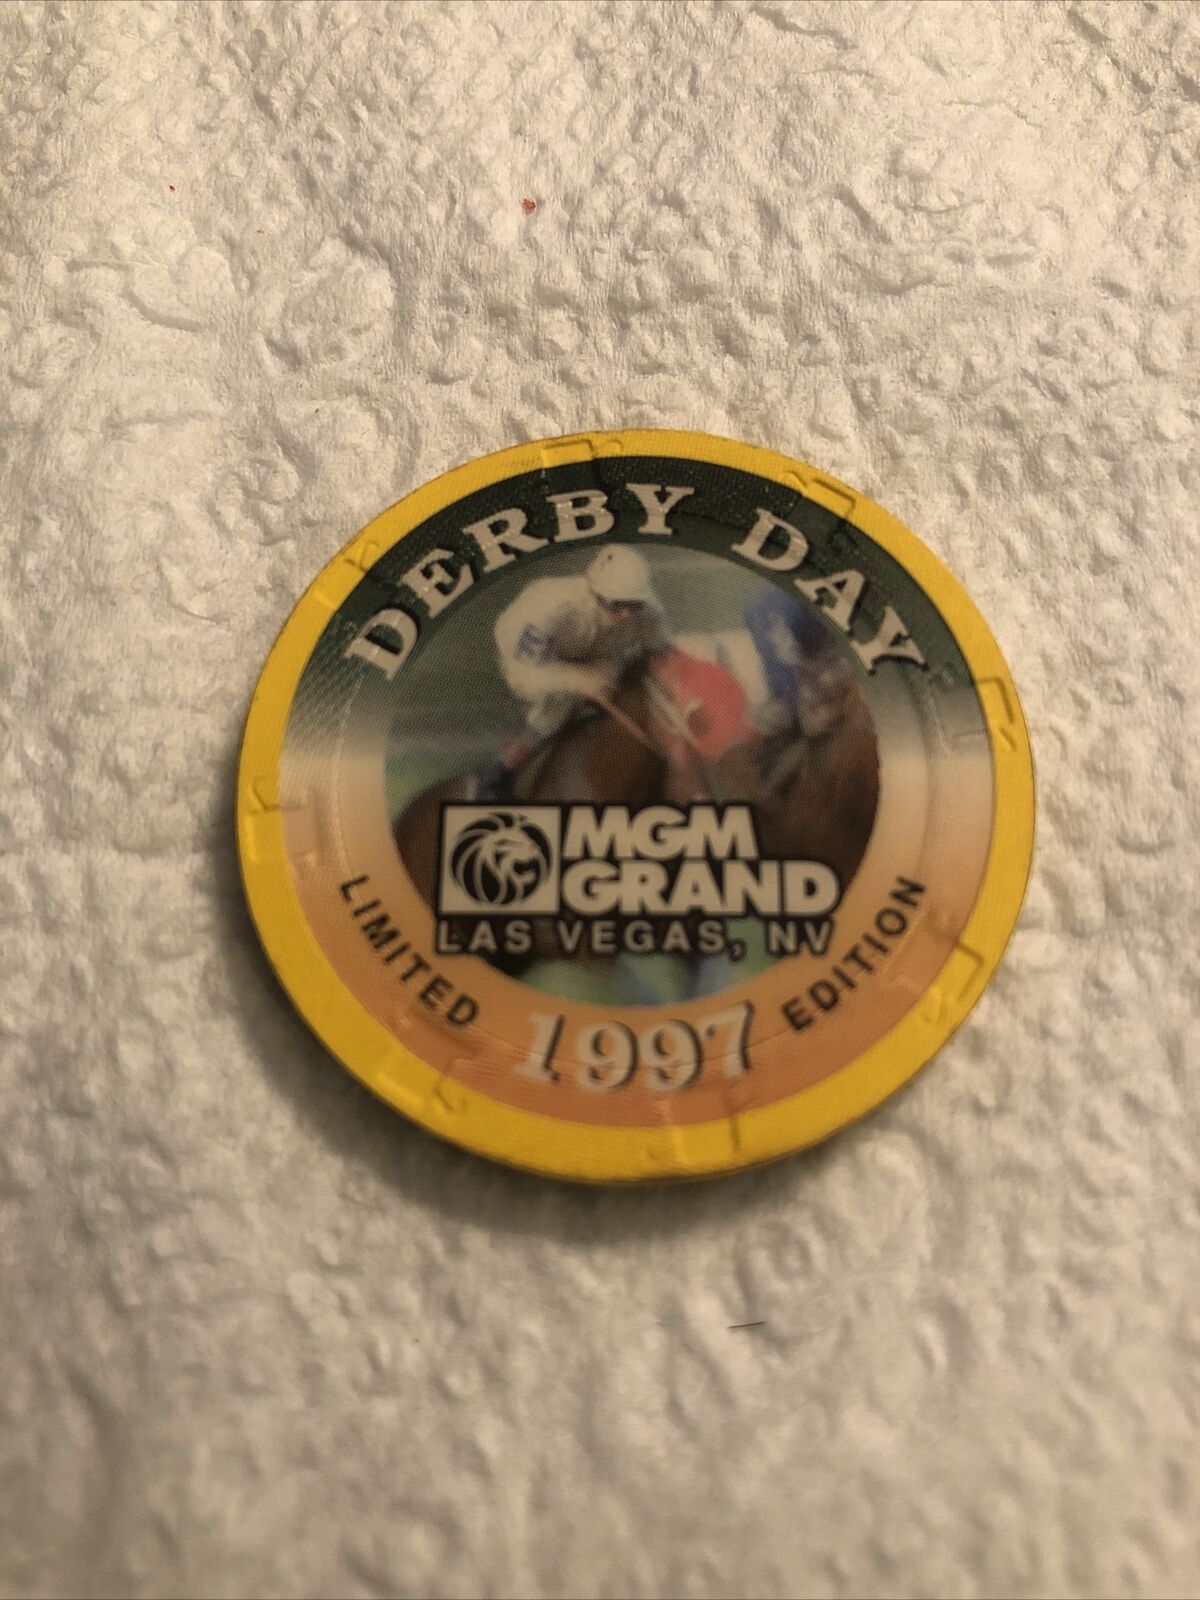 MGM Grand Casino Derby Day 1997 Limited Edition Chip Very Rare